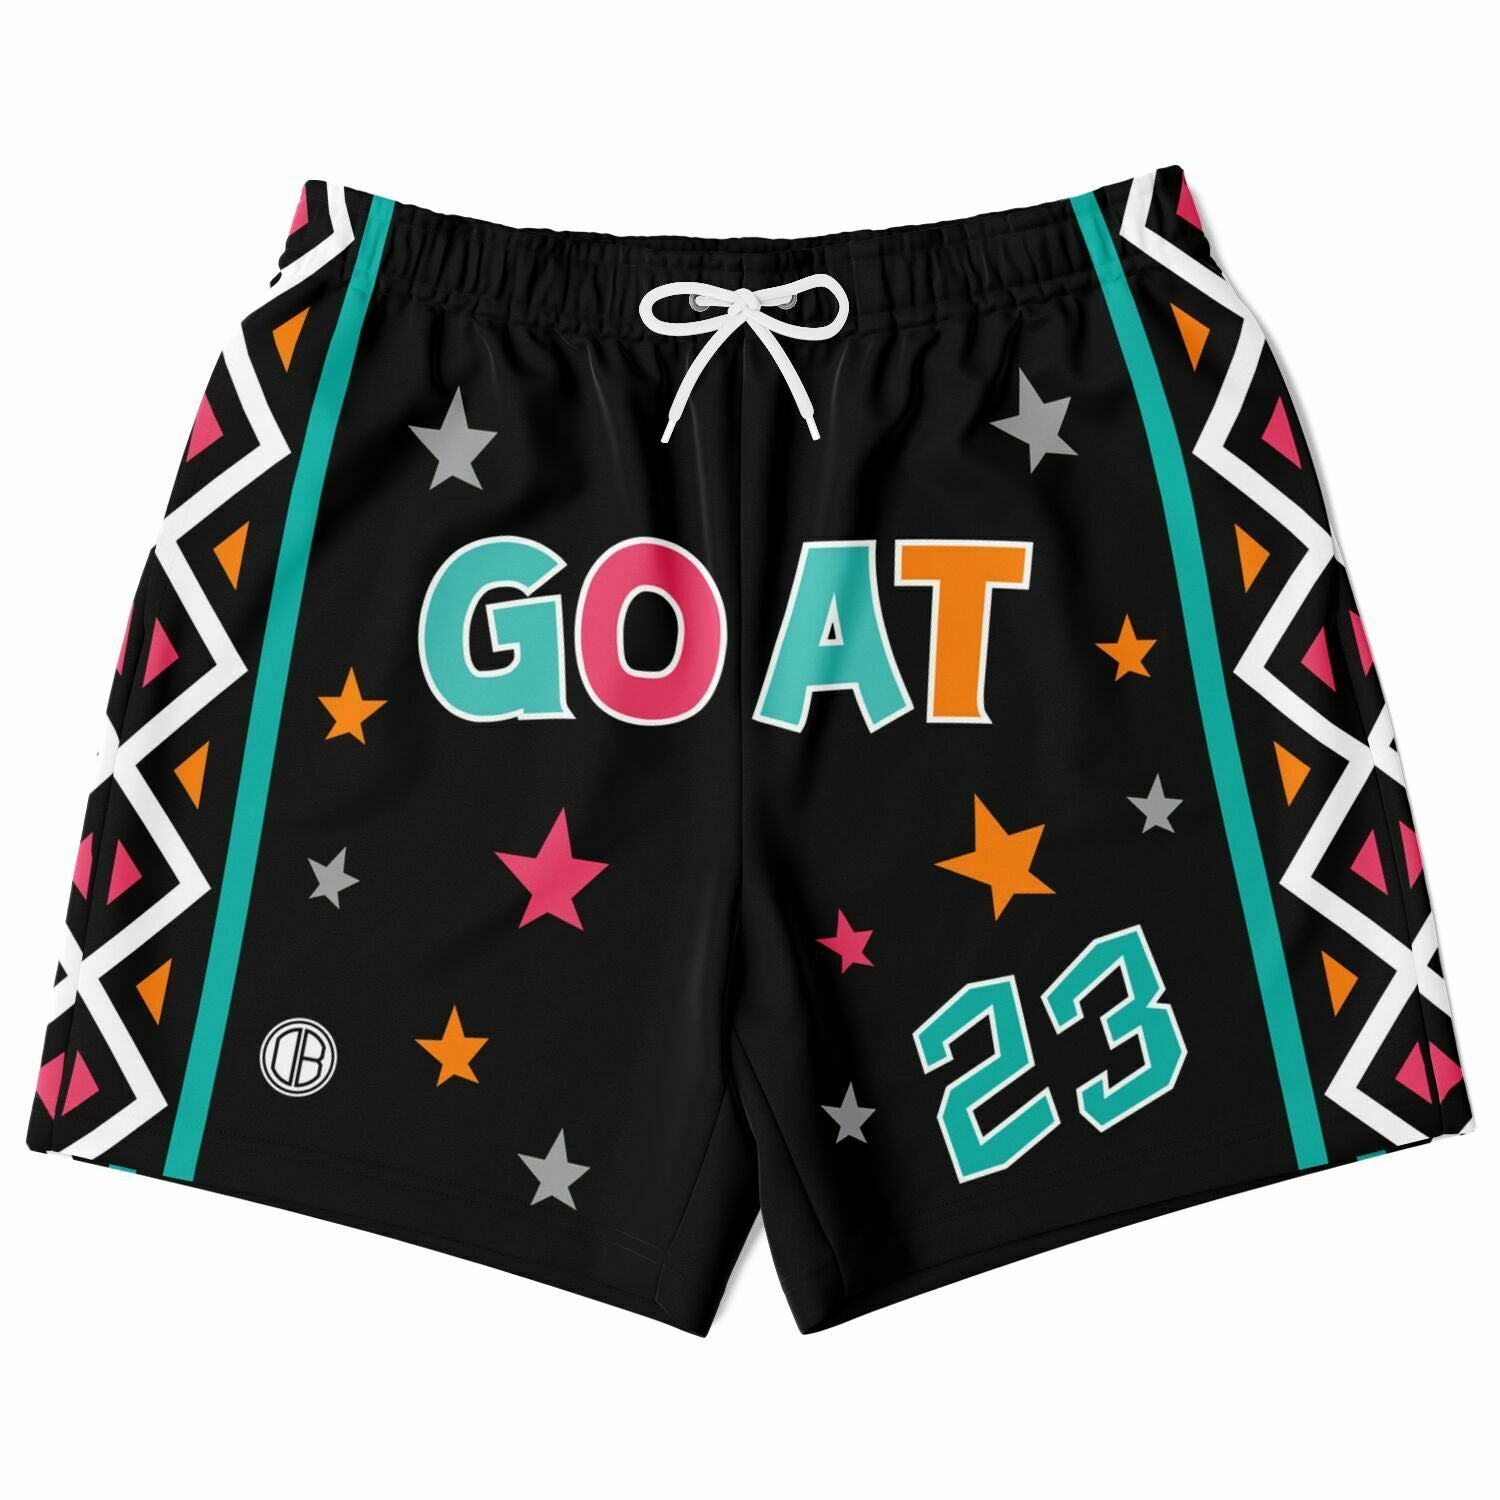 DearBBall Fashion Short - The GOAT 1996 All Star Game Edition